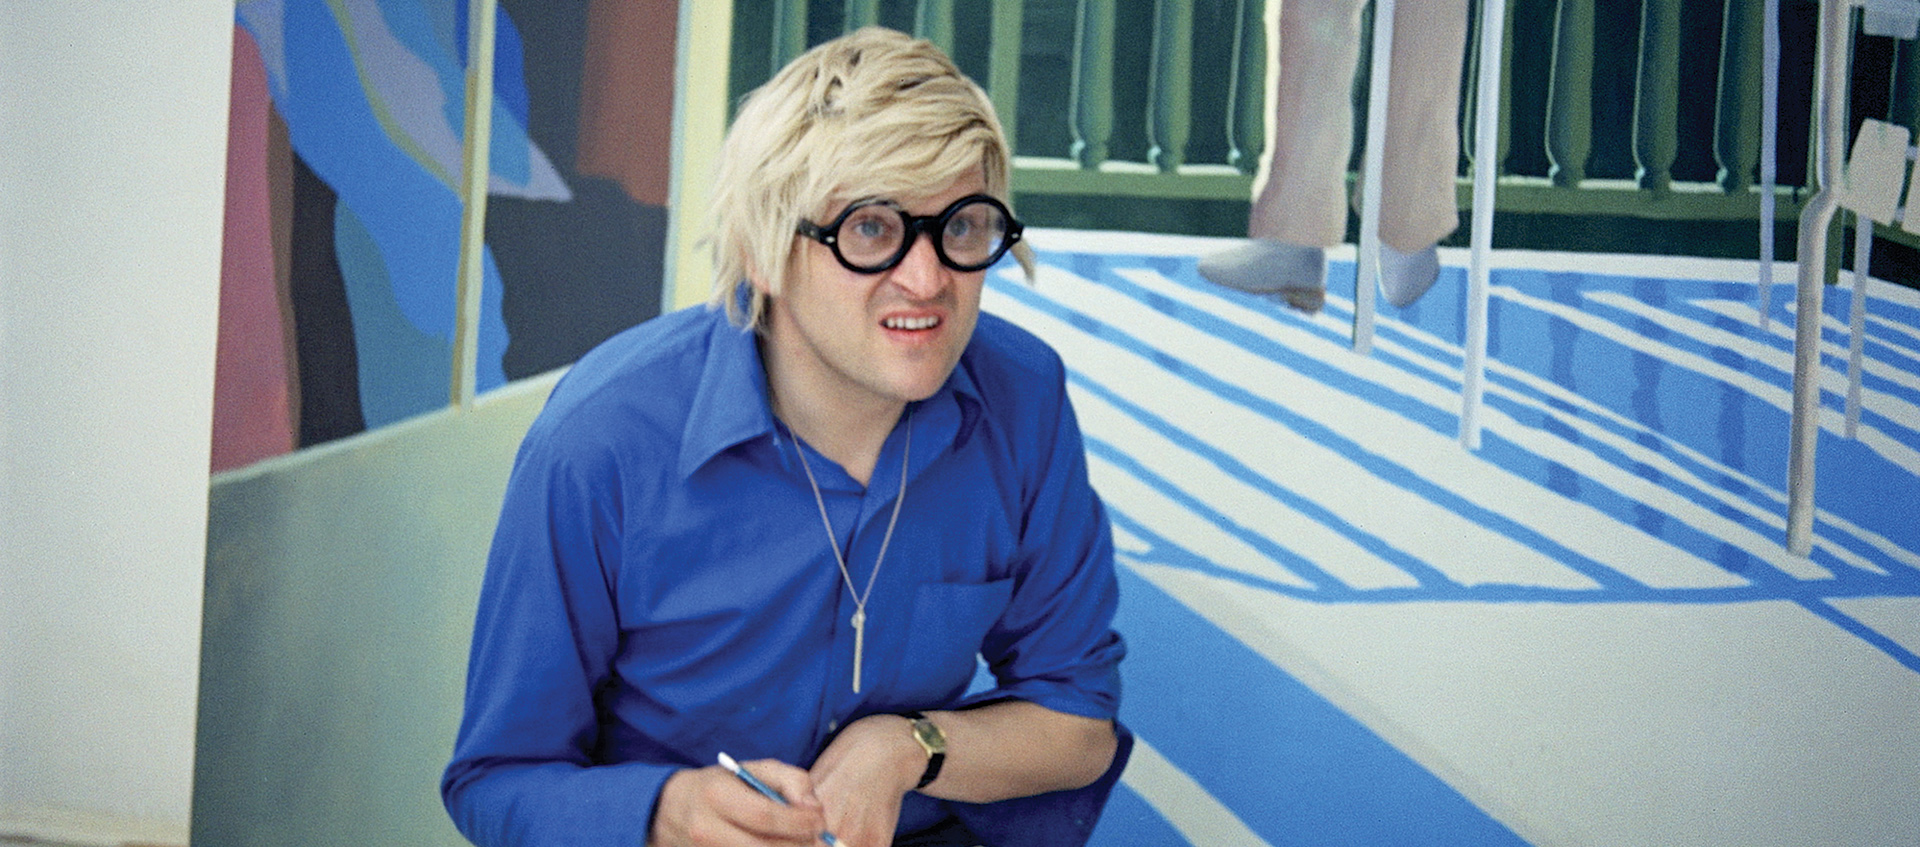 An image of British artist David Hockney sitting in front of one of his paintings in a scene from Jack Hazan's 1973 film A Bigger Splash